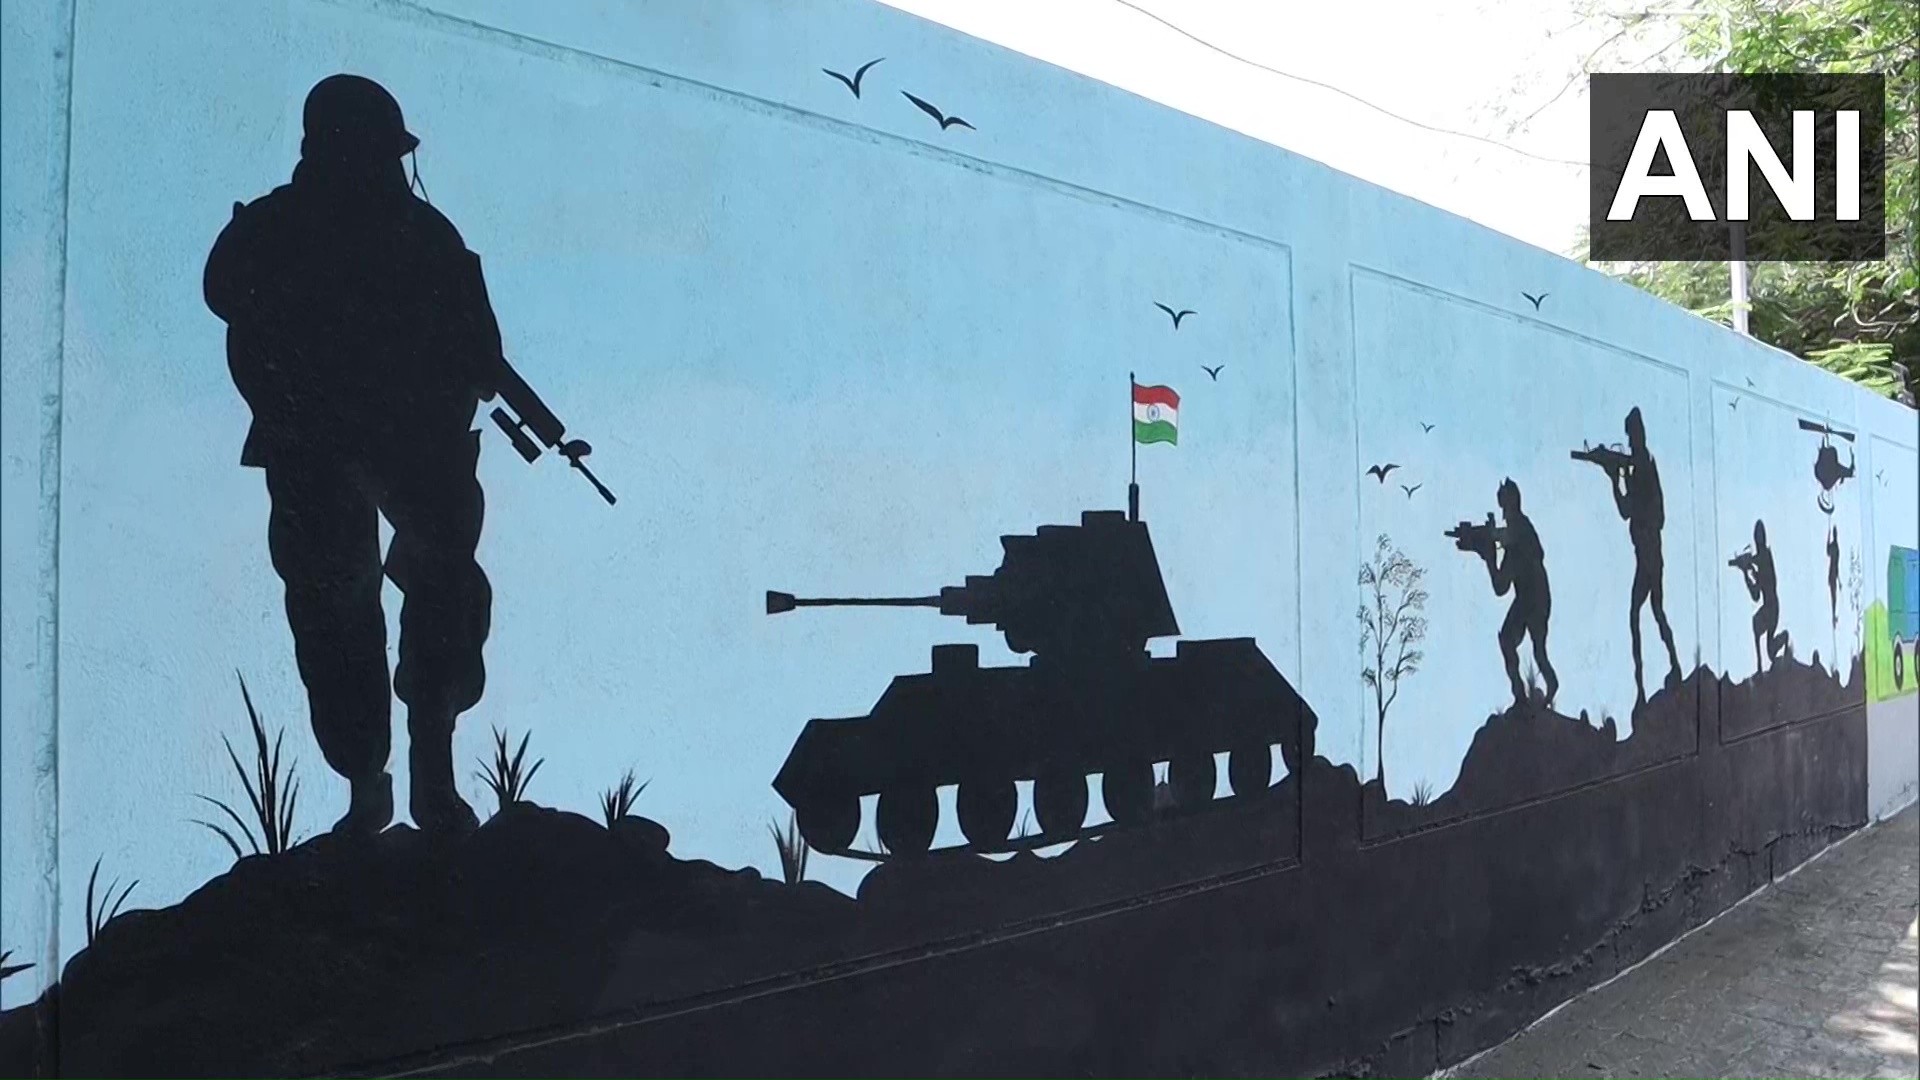 Gujarat Beautification of public places in Surat is being done via wall paintings 